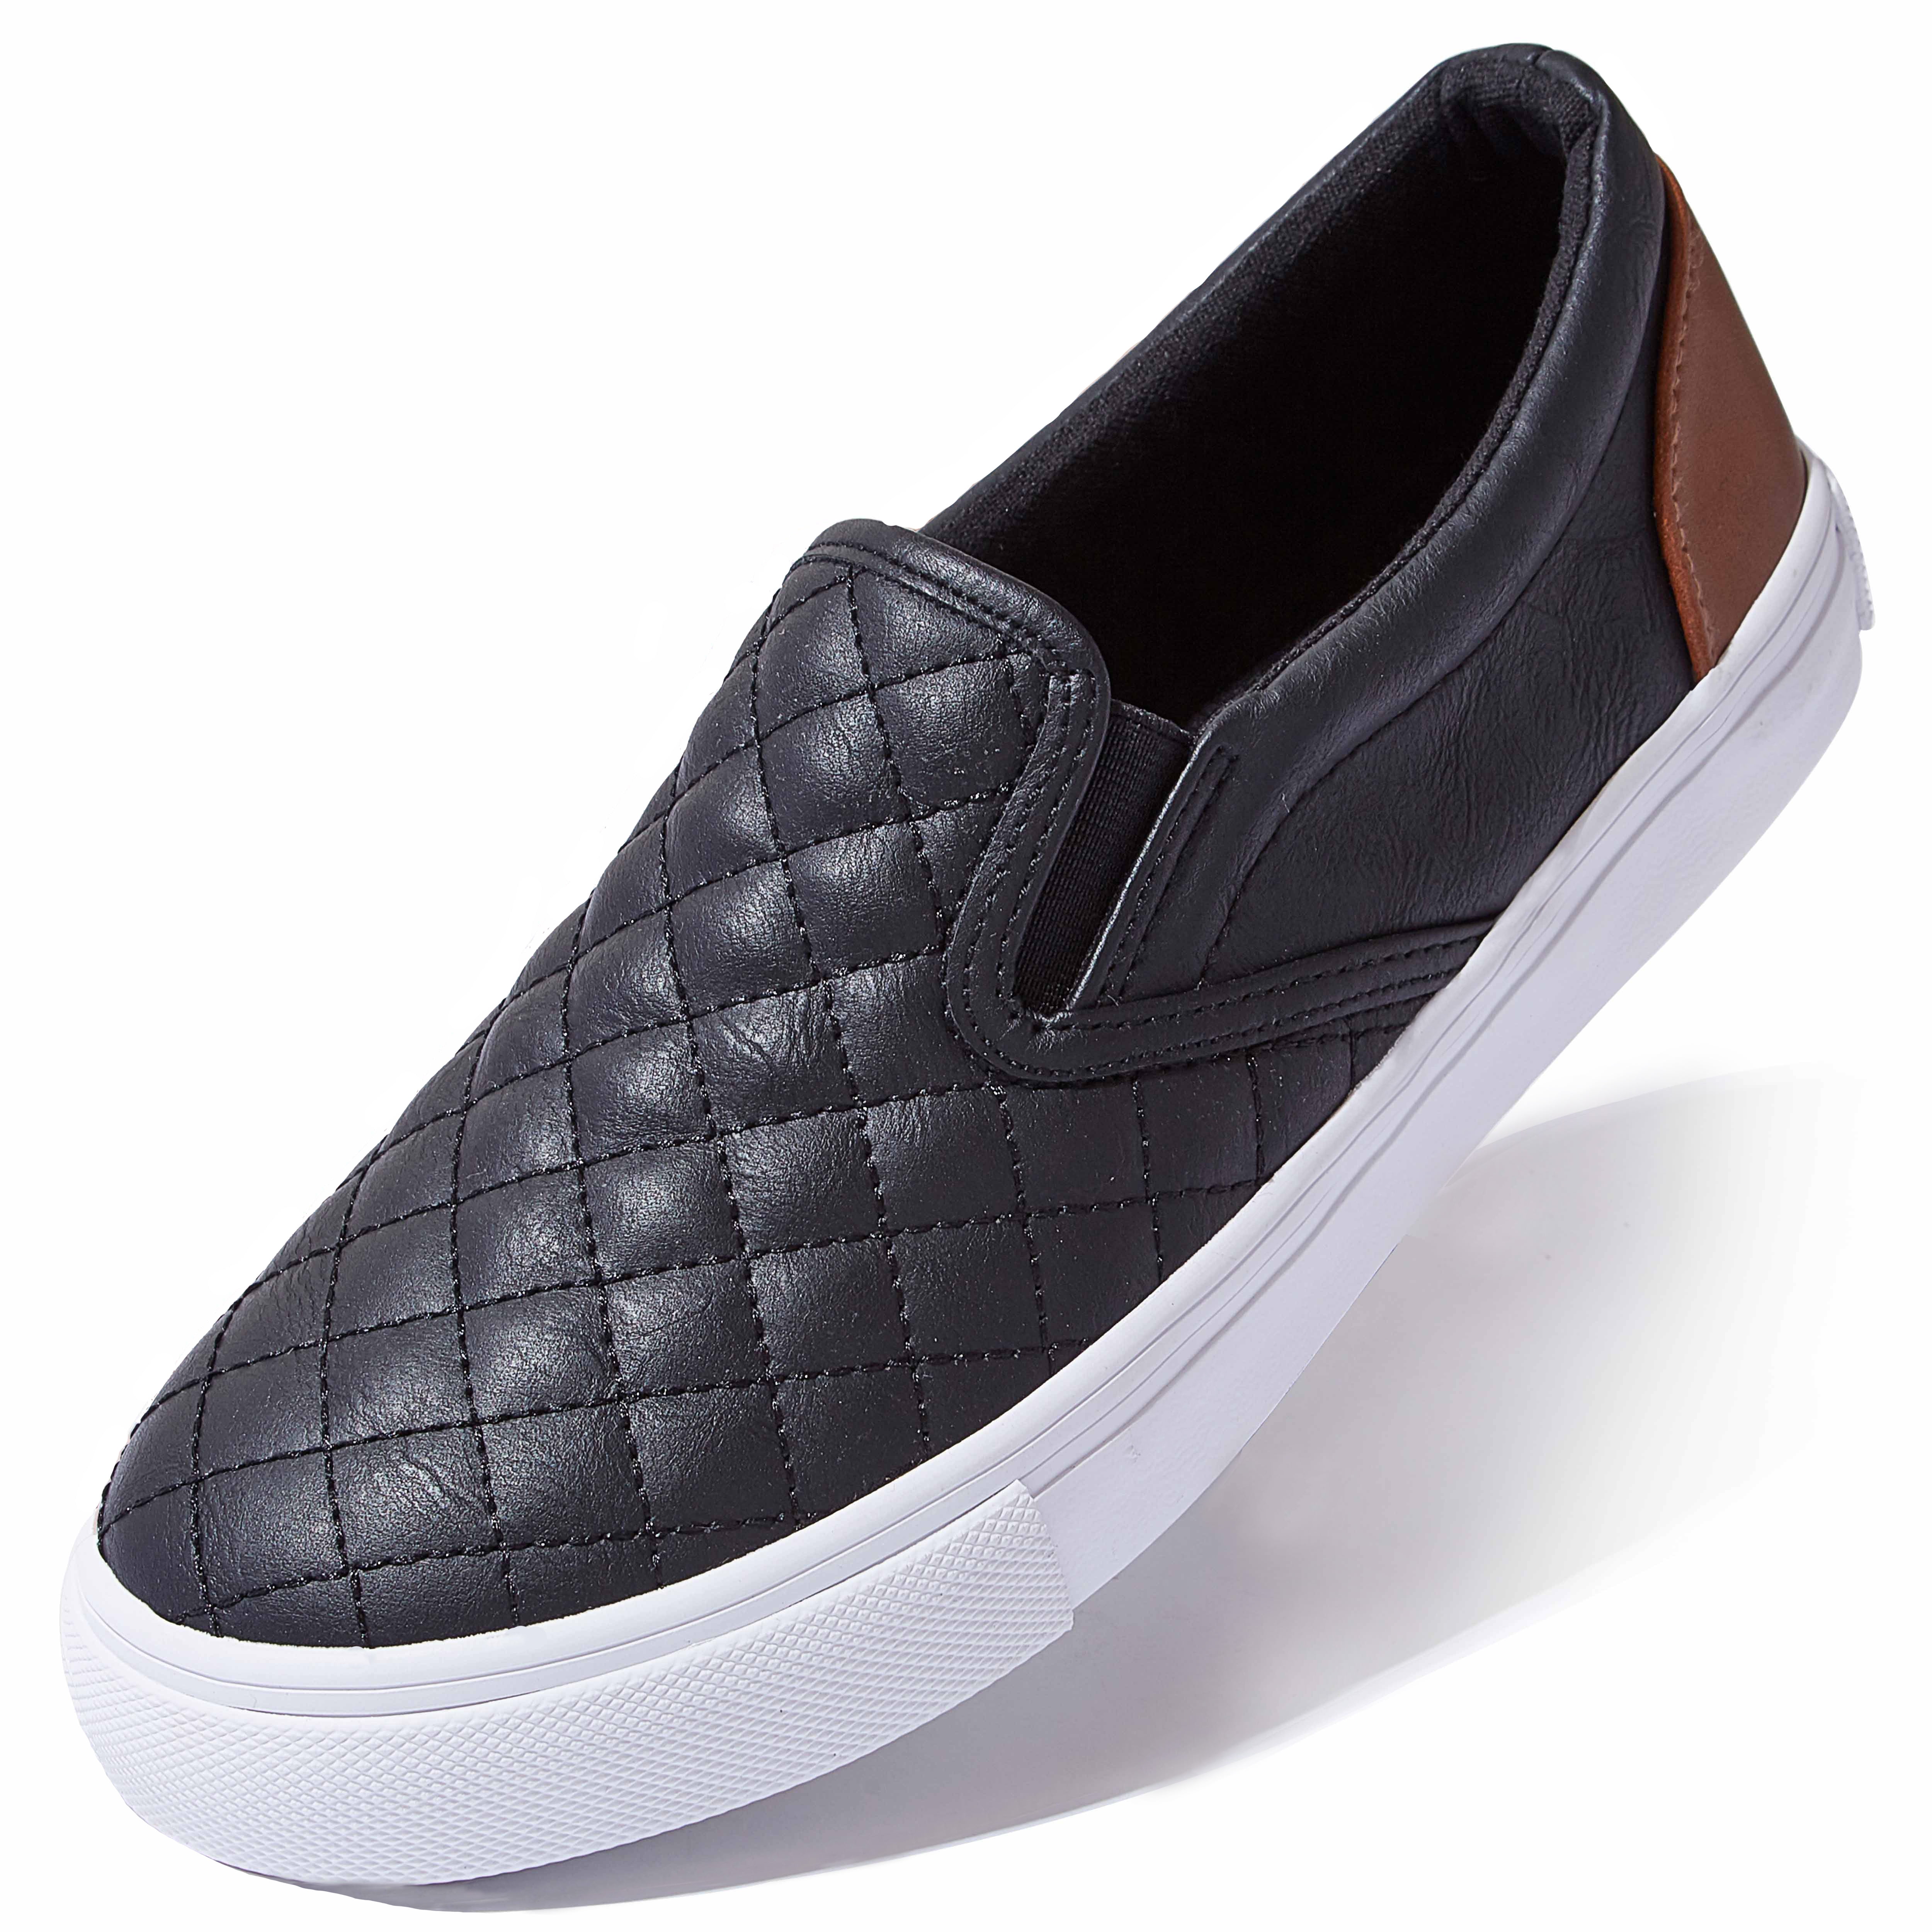 DailyShoes - DailyShoes Quilted Casual Slip-on Sneakers Slip On Hour ...